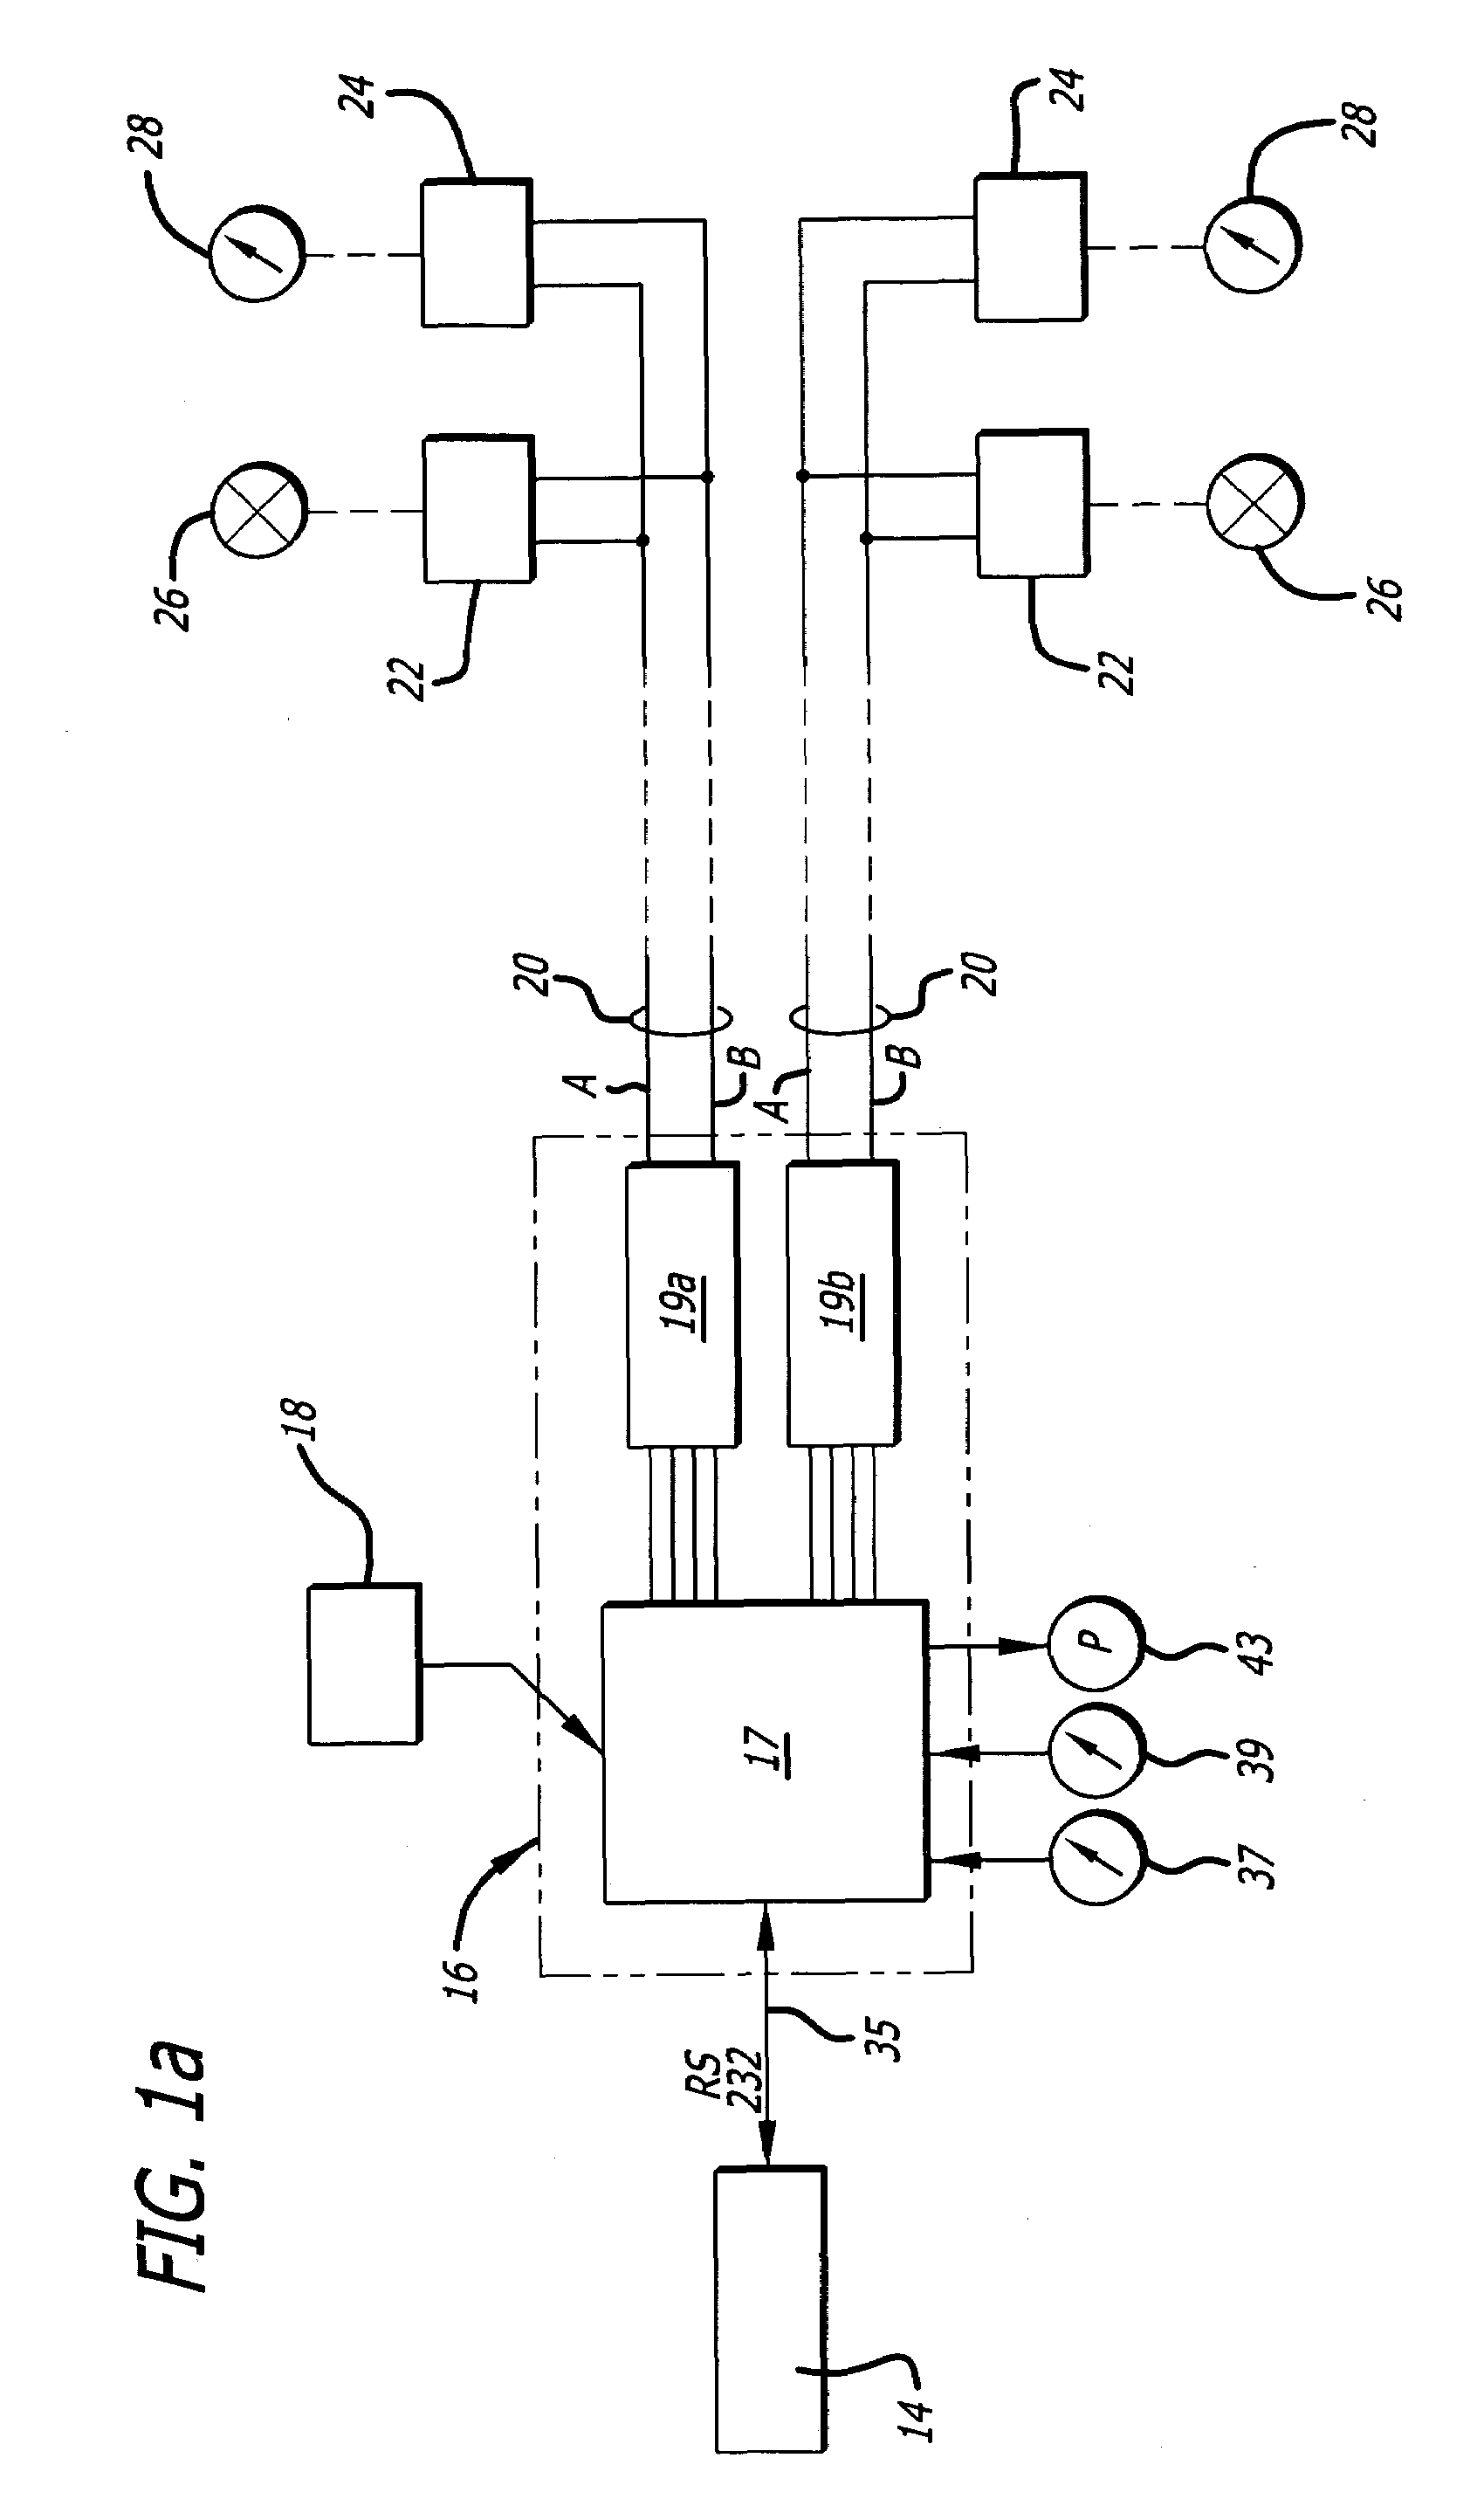 Two-wire power and communications for irrigation systems